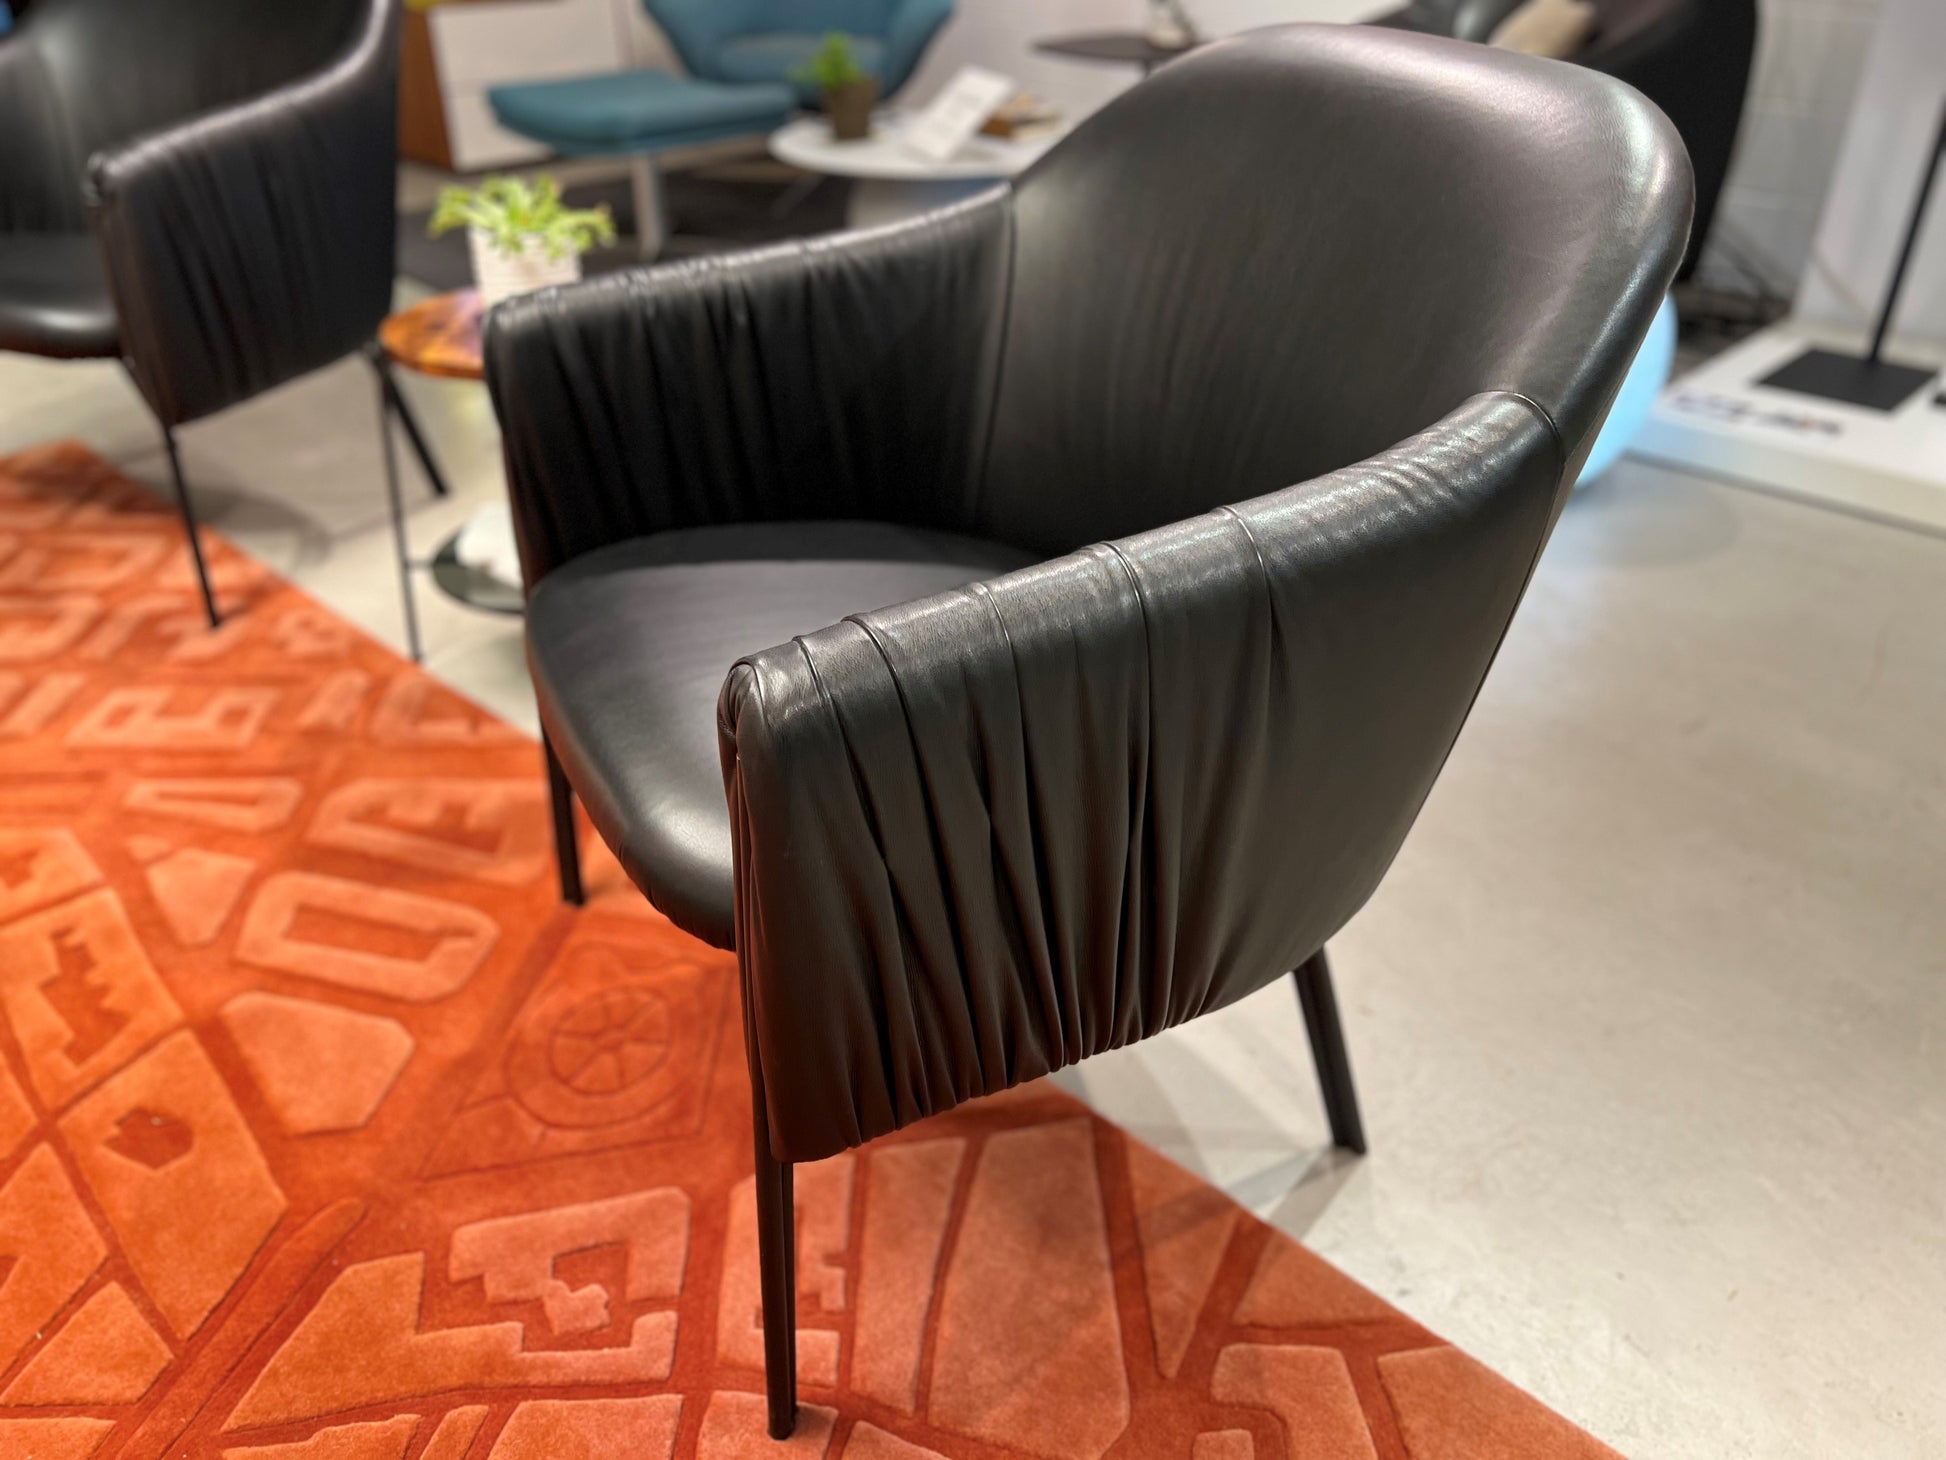 Celine Cocktail Chair by Freifrau in black leather